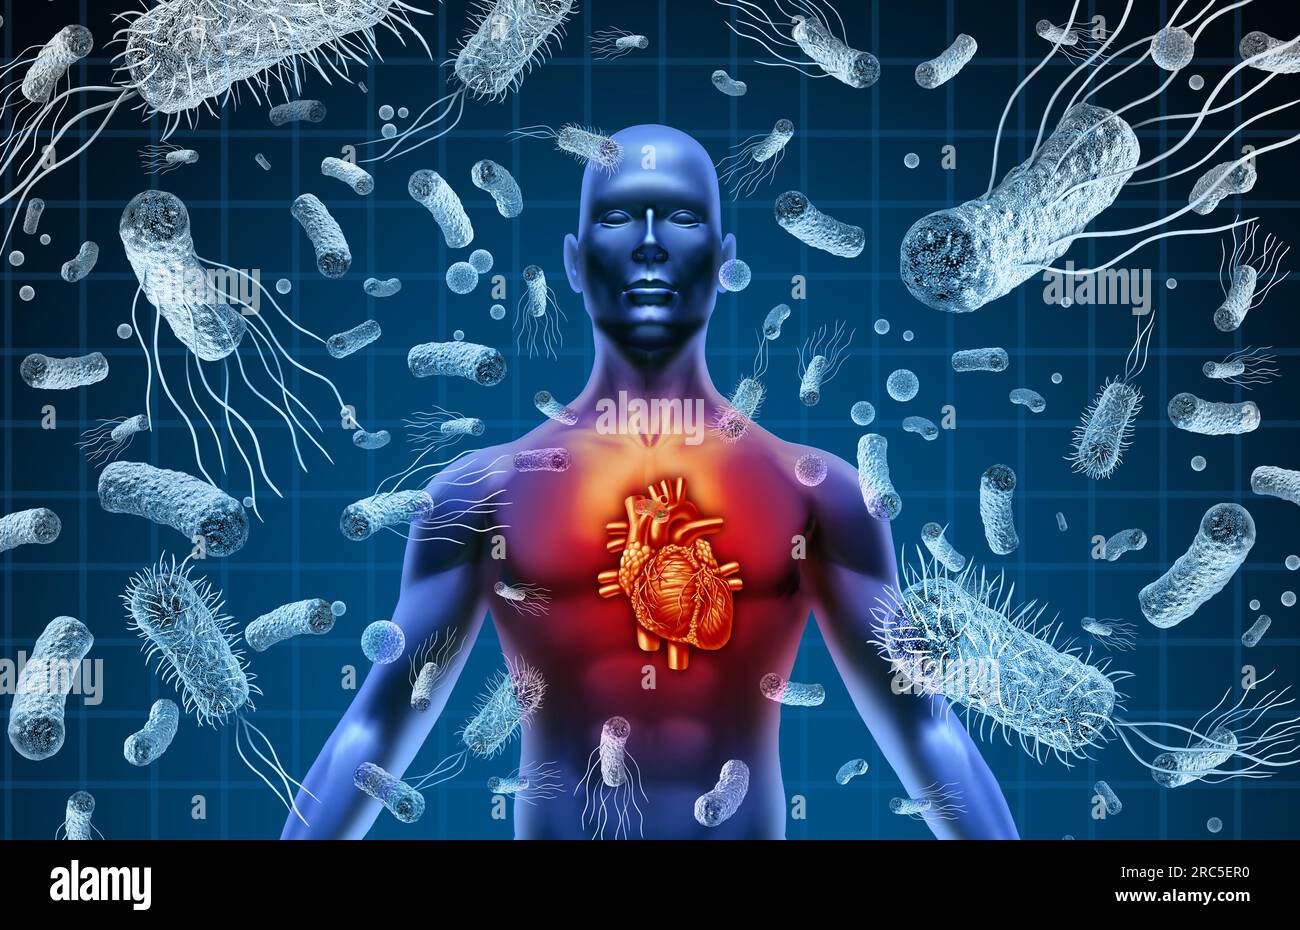 Heart And Bacteria or Bacterial Endocarditis and septicemia or sepsis as blood poisoning due to germs with 3D illustration elements. Stock Photo